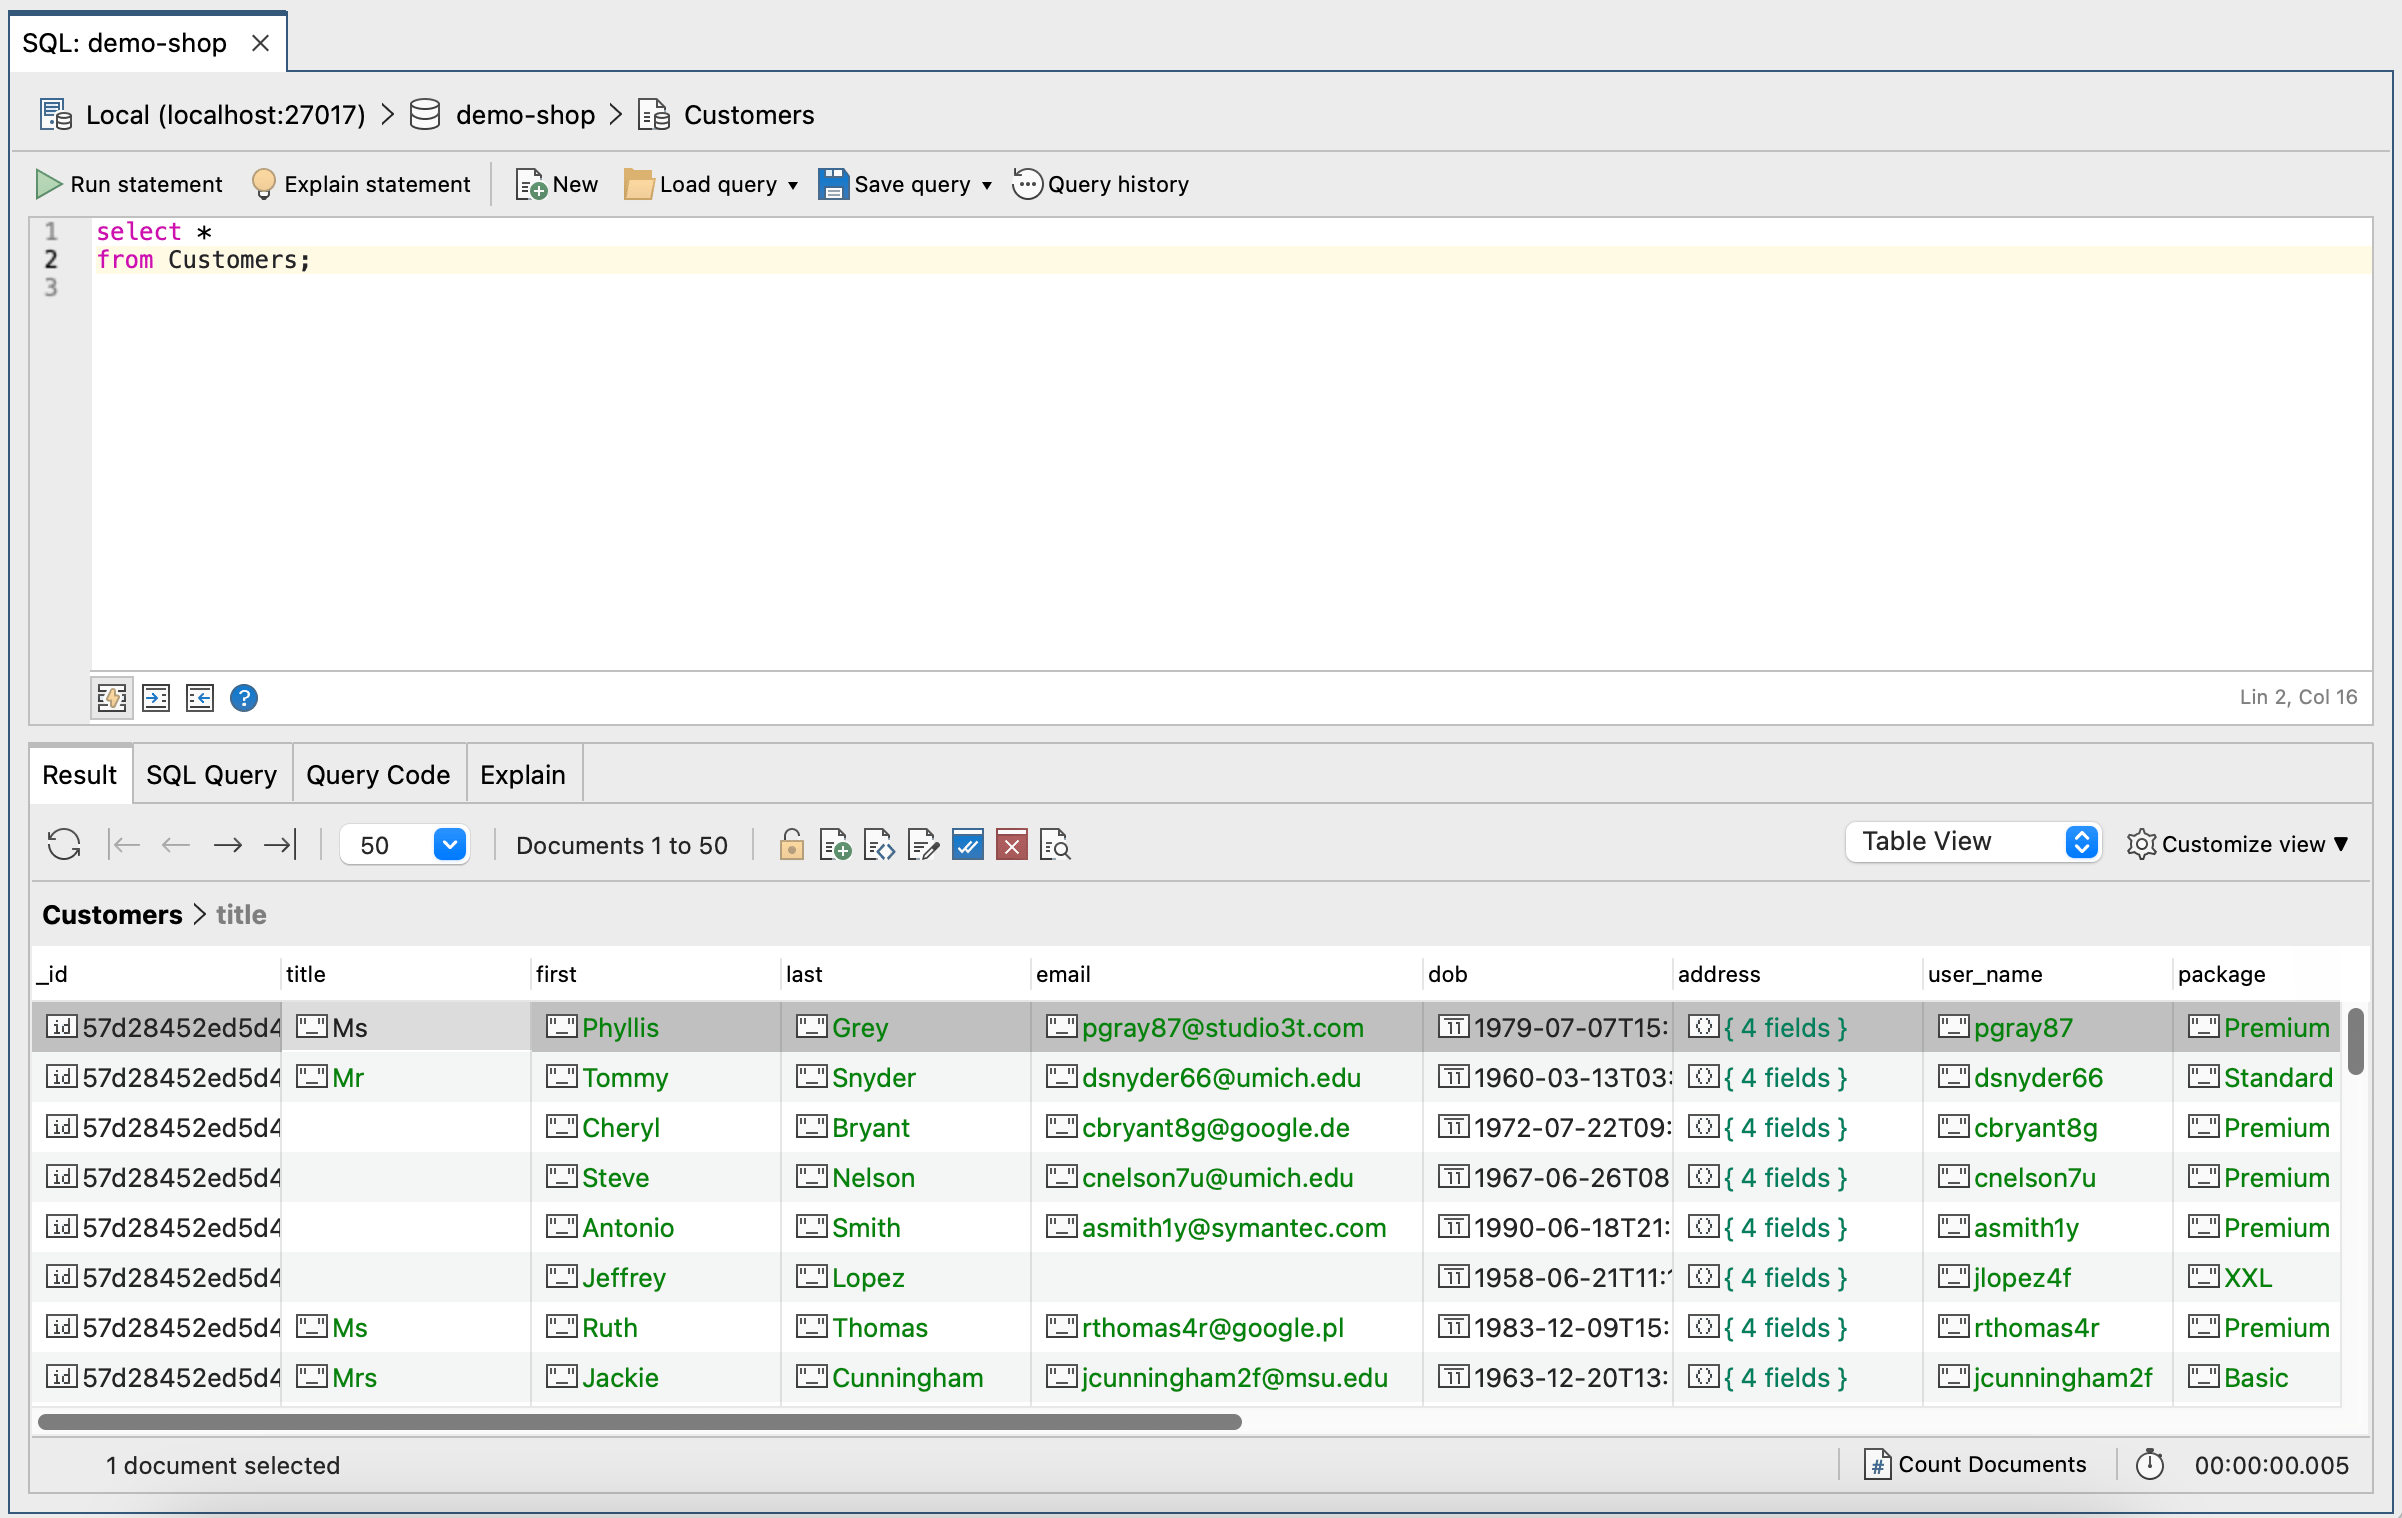 You can query MongoDB with SQL in the Editor area and view results in the Results Tab